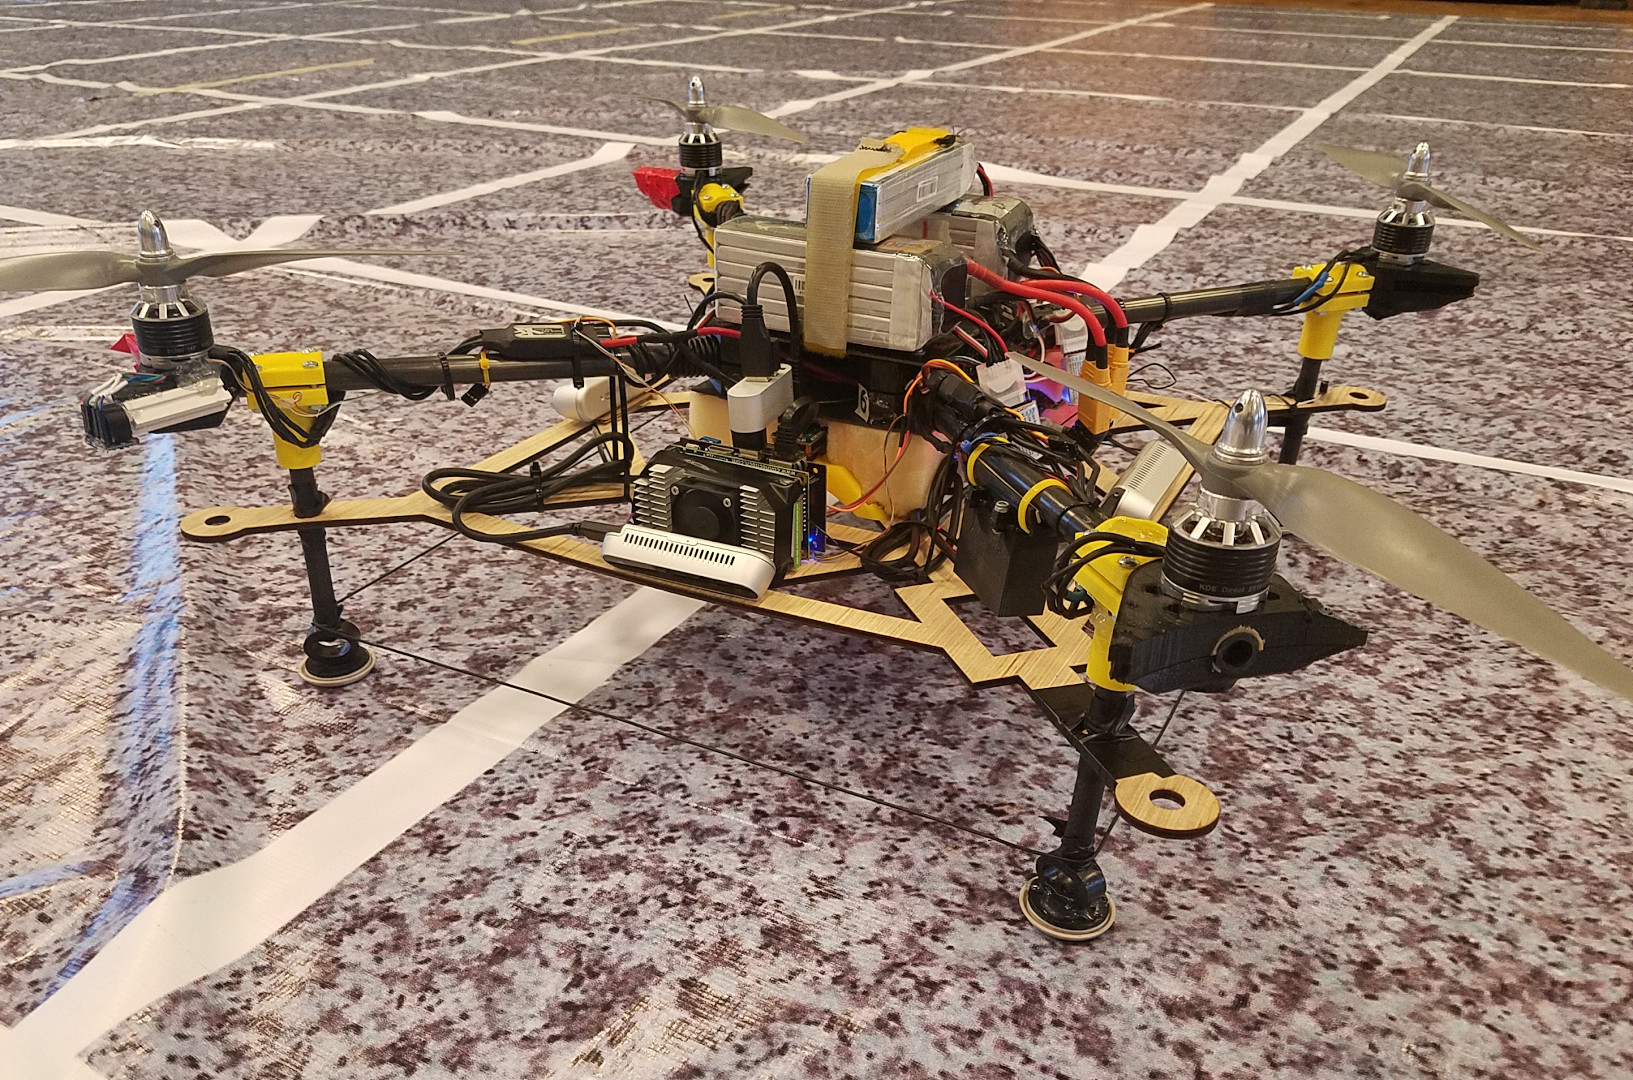 The 2018 competition drone